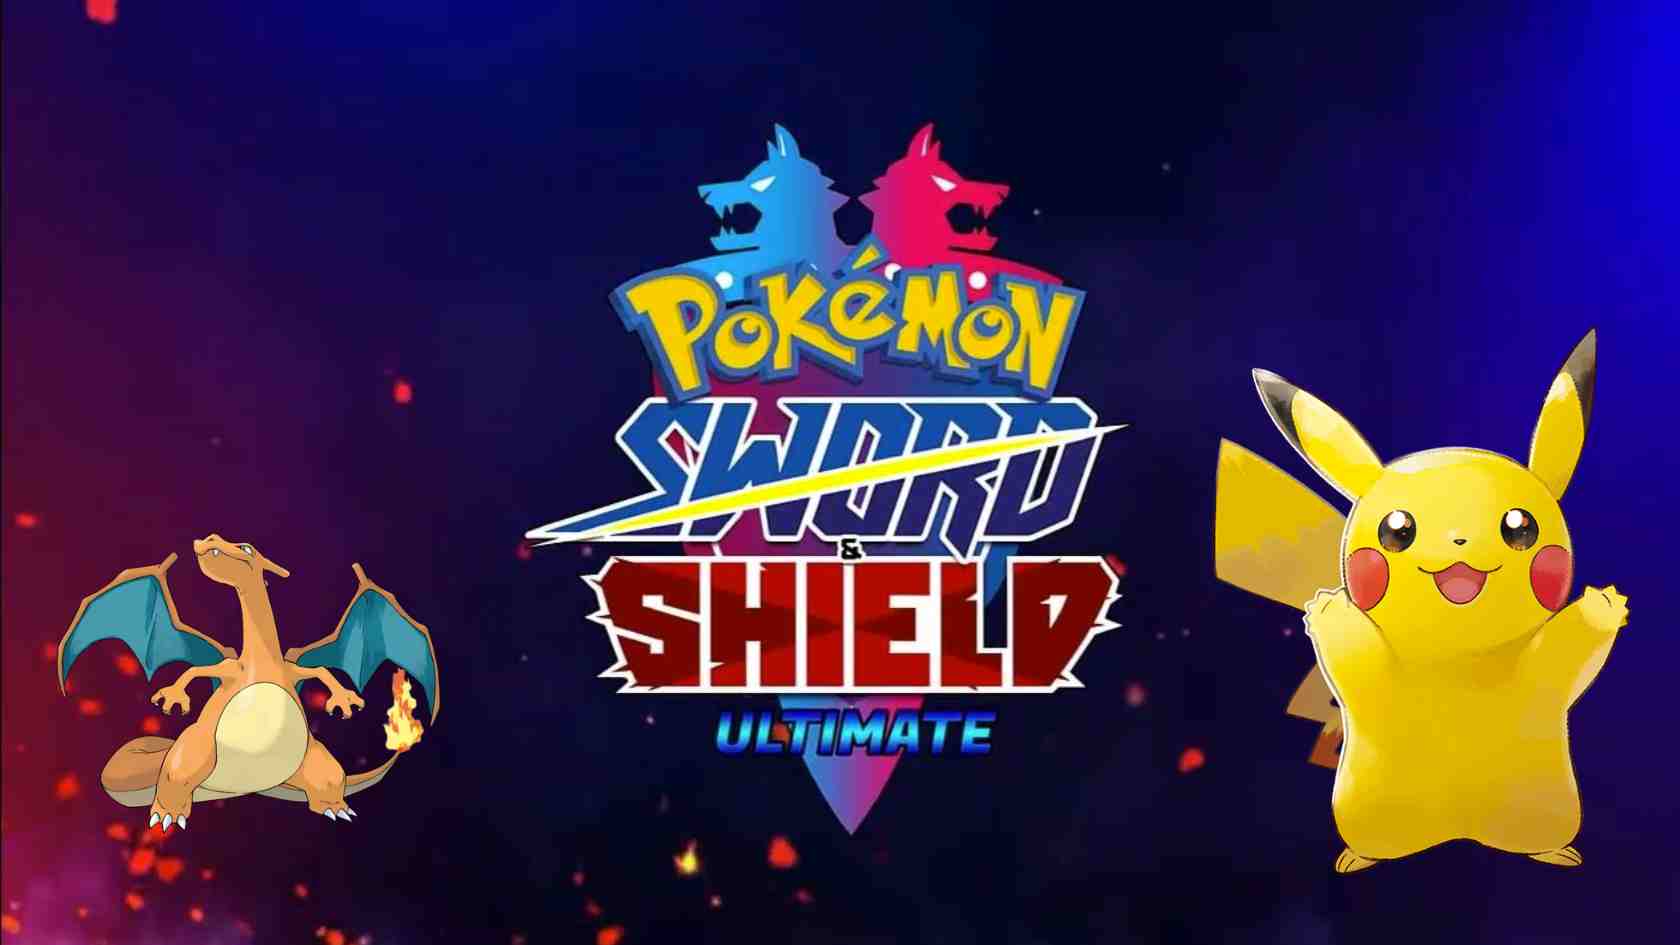 How to download pokemon sword snd shield gba english version on android /  How to play sword shield 